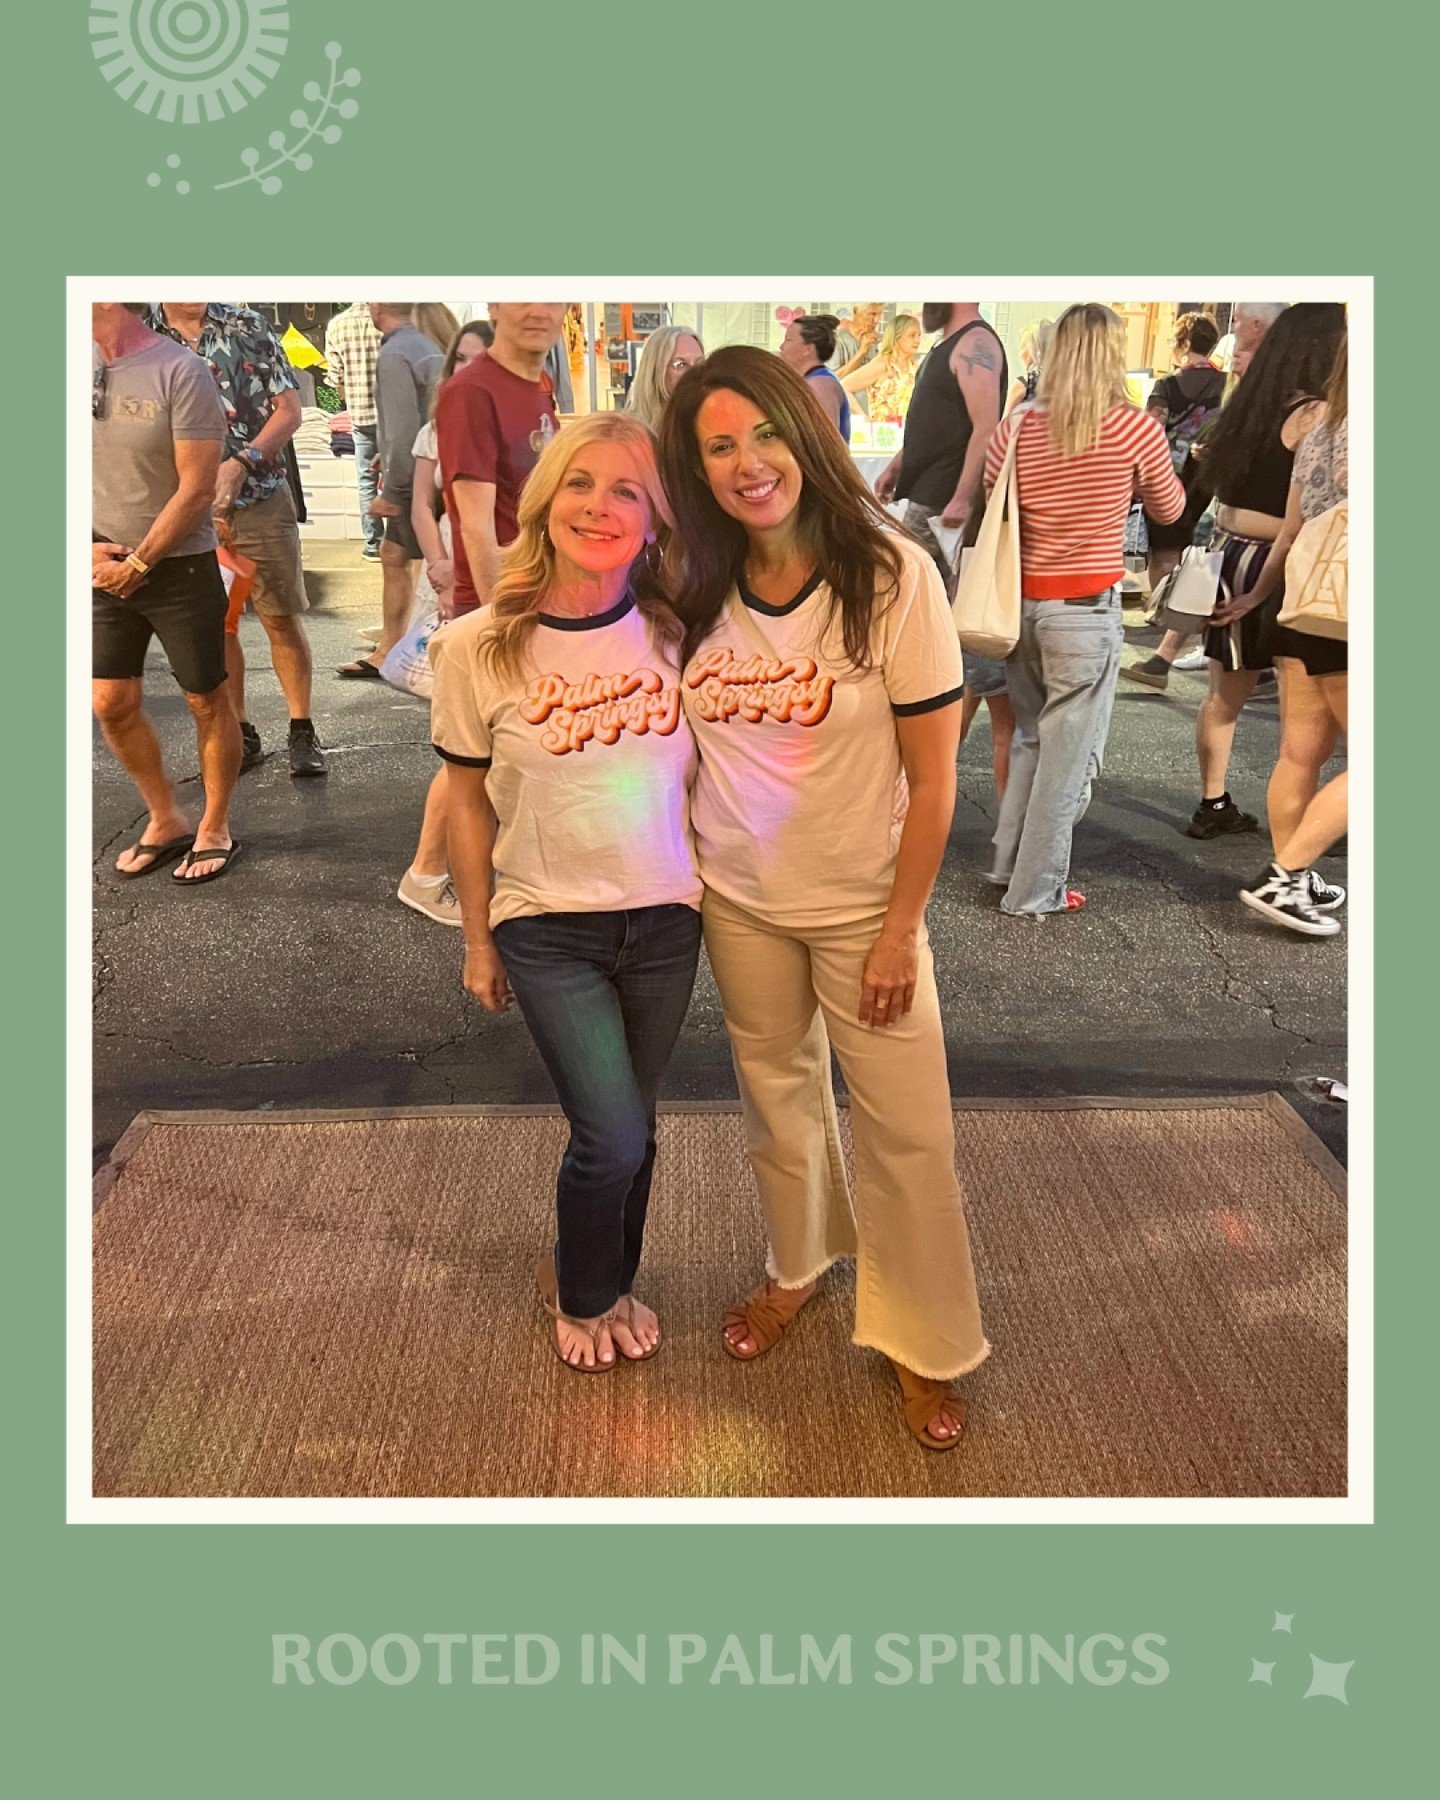 We loved meeting these besties twinning in our Palm Springsy Tees and celebrating a birthday!! 🎂🥳💝
*
*
*
*
*
#rootedinpalmsprings #palmsprings #palmspringsy #downtownpalmsprings #palmspringsca #palmspringscalifornia #palmspringslife #palmspringsst